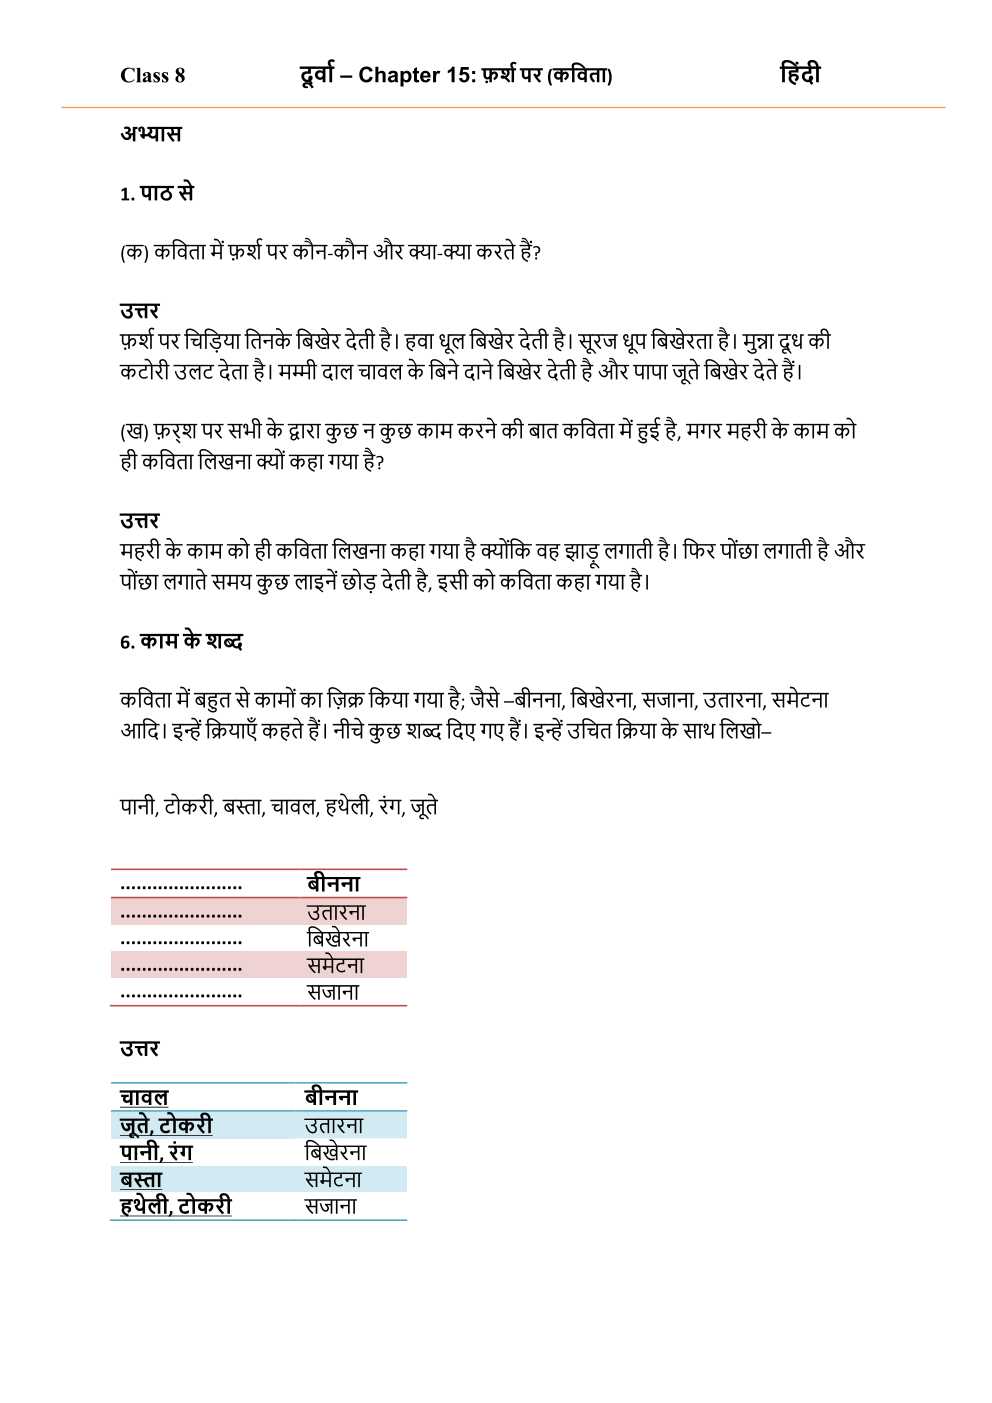 NCERT Solutions For Class 8 Hindi Durva Chapter 15